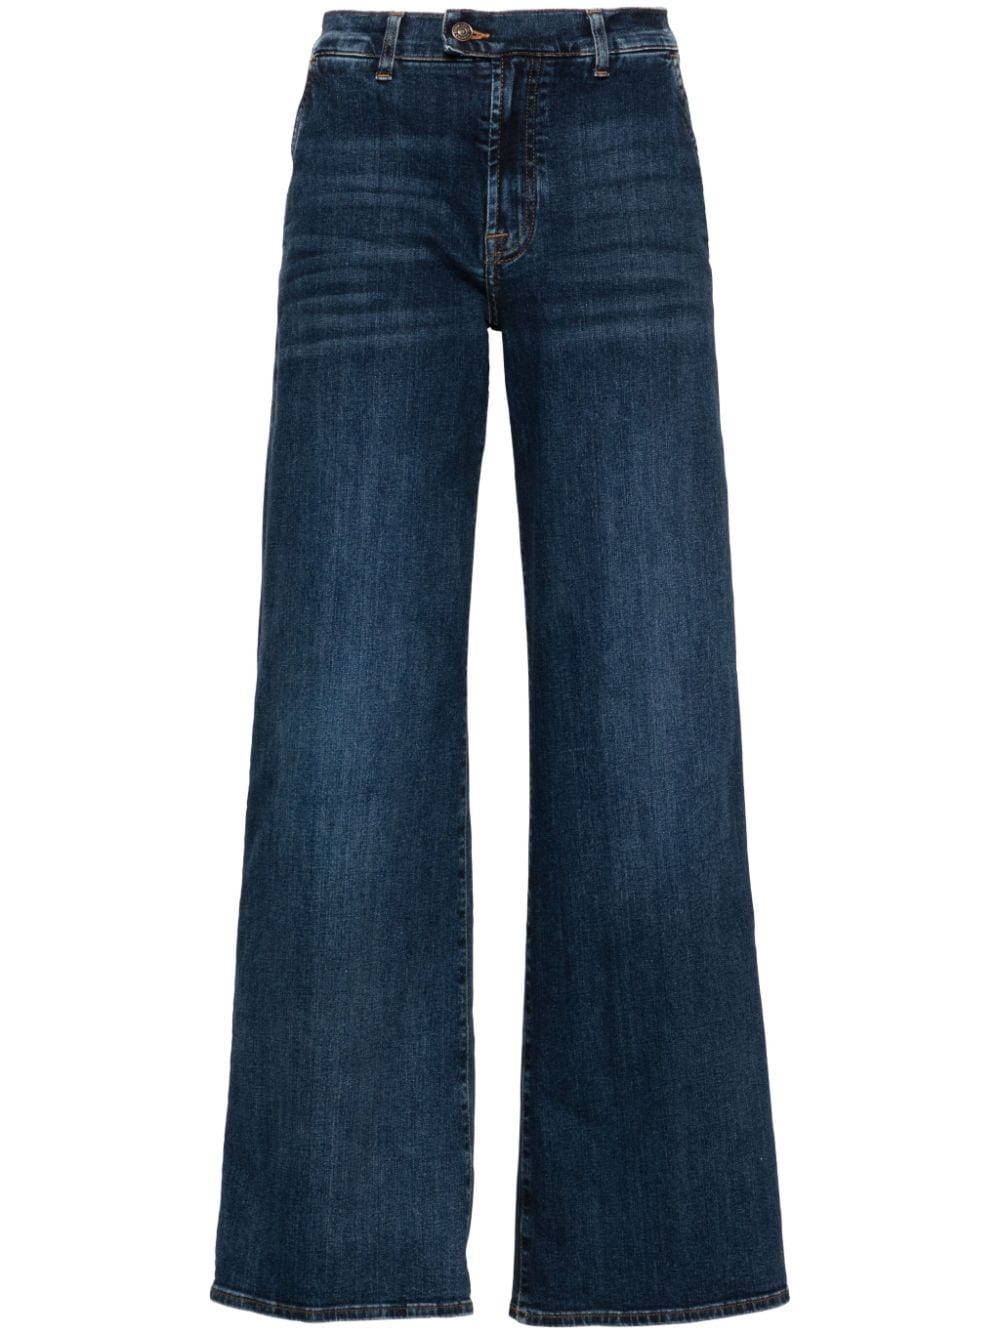 7 For All Mankind Tailored Lotta wide-leg jeans - Blue von 7 For All Mankind